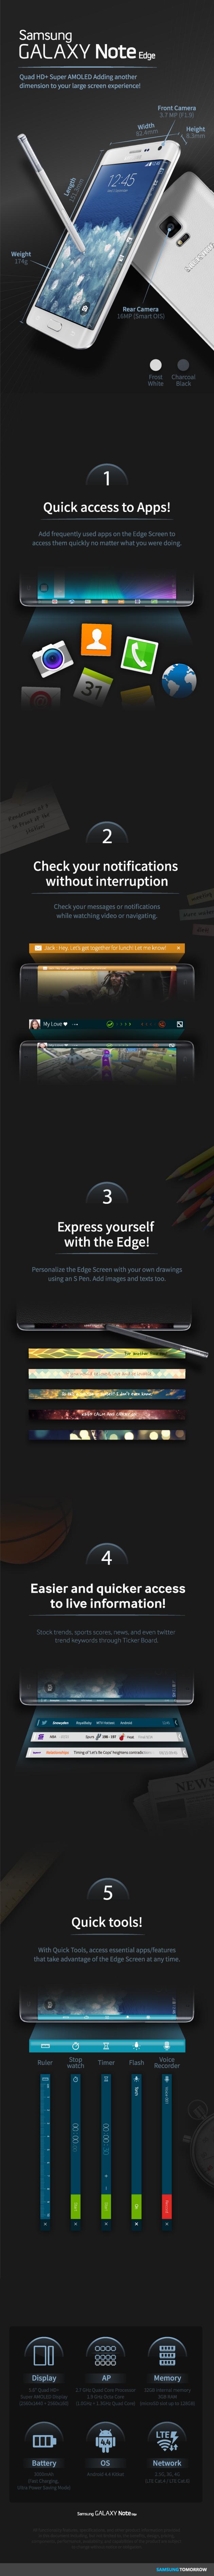 Galaxy-Note-Edge-Infographic